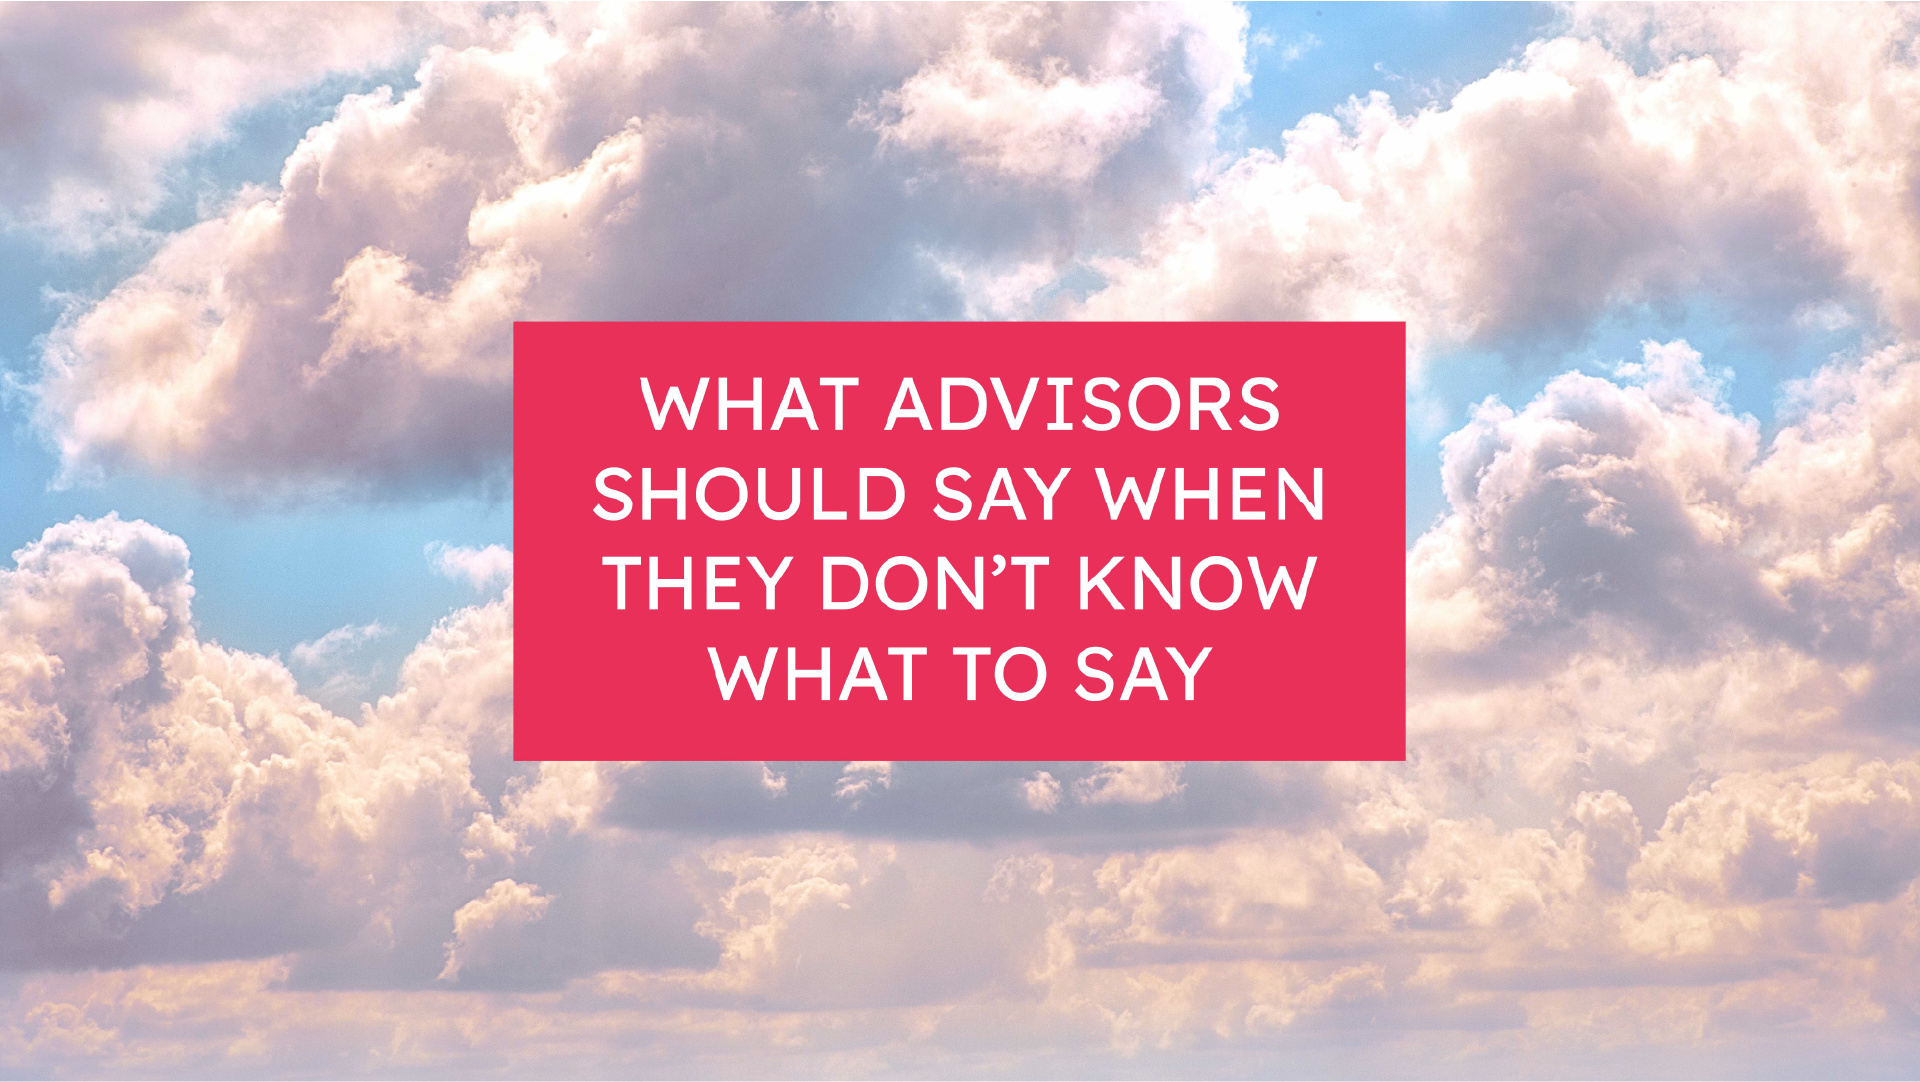 What Advisors Should Say When They Don’t Know What to Say